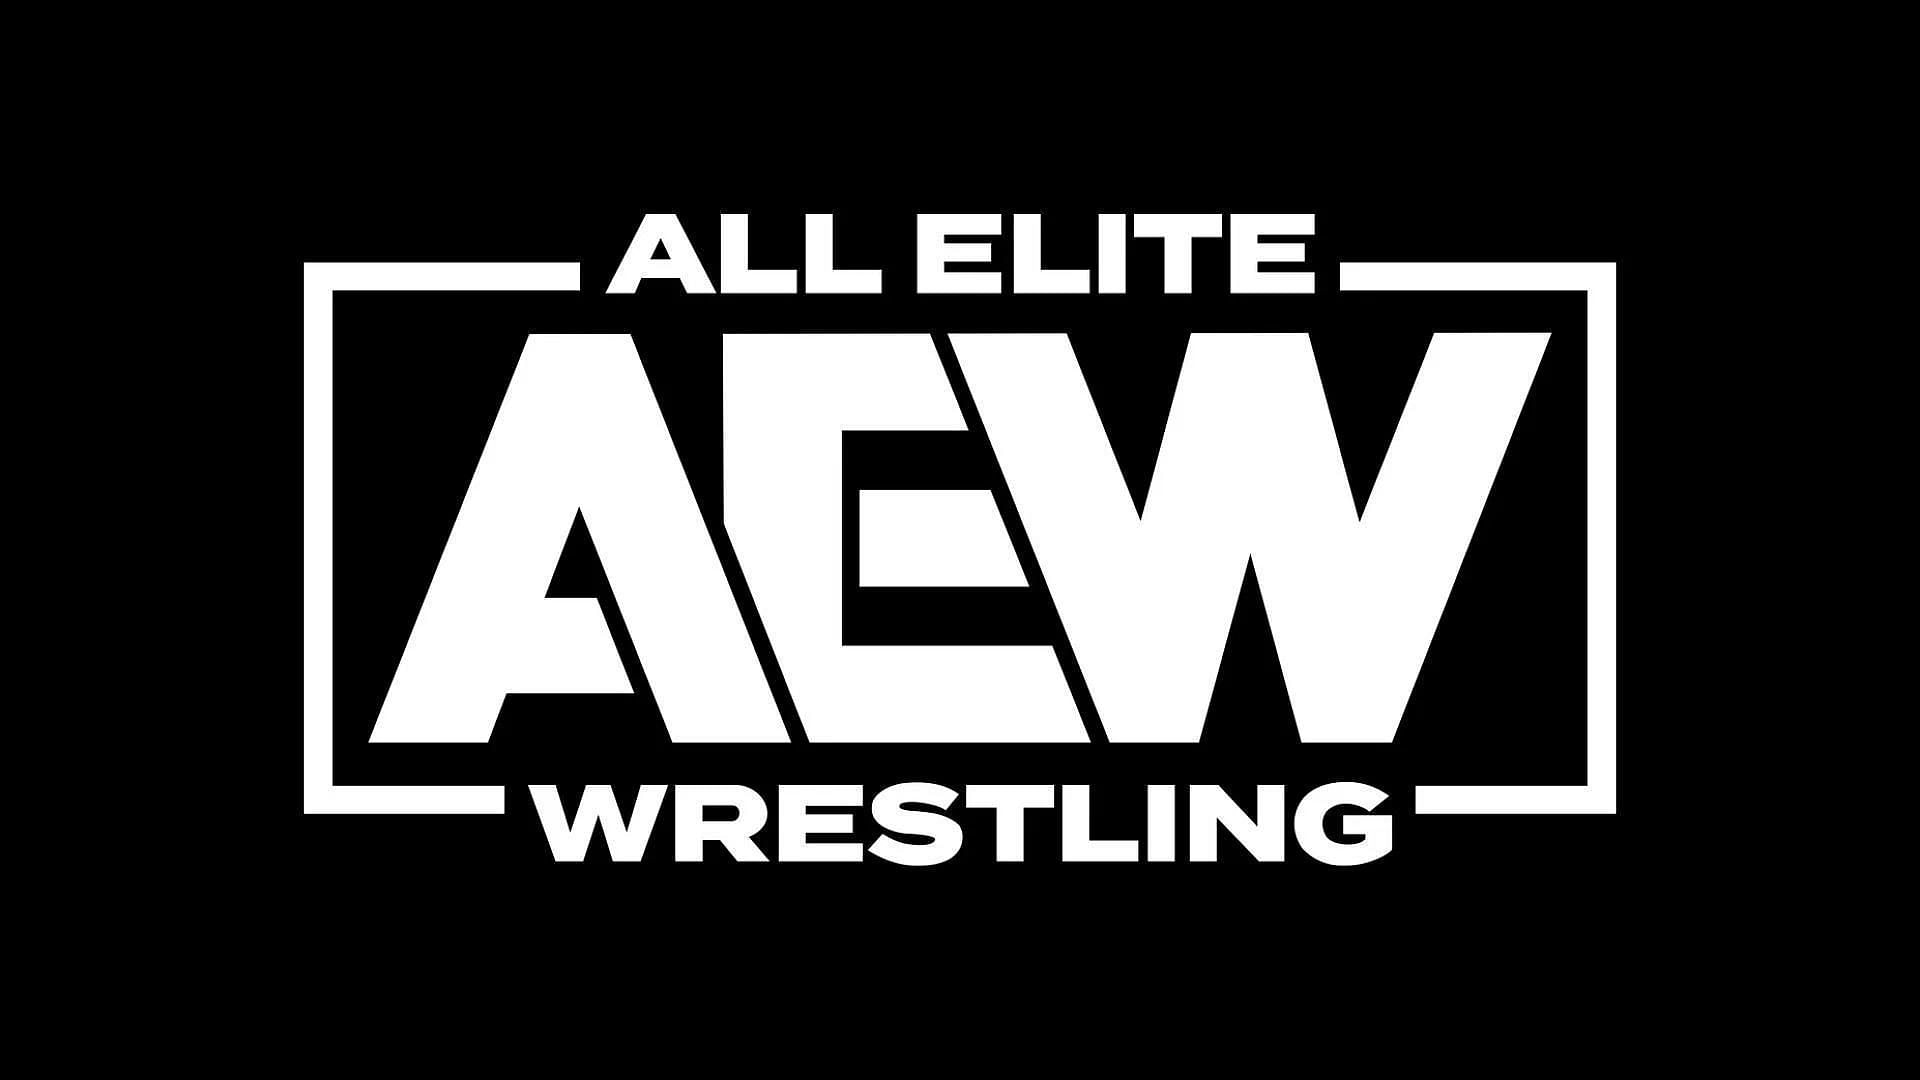 Could another major promotion land a top champion instead of AEW?